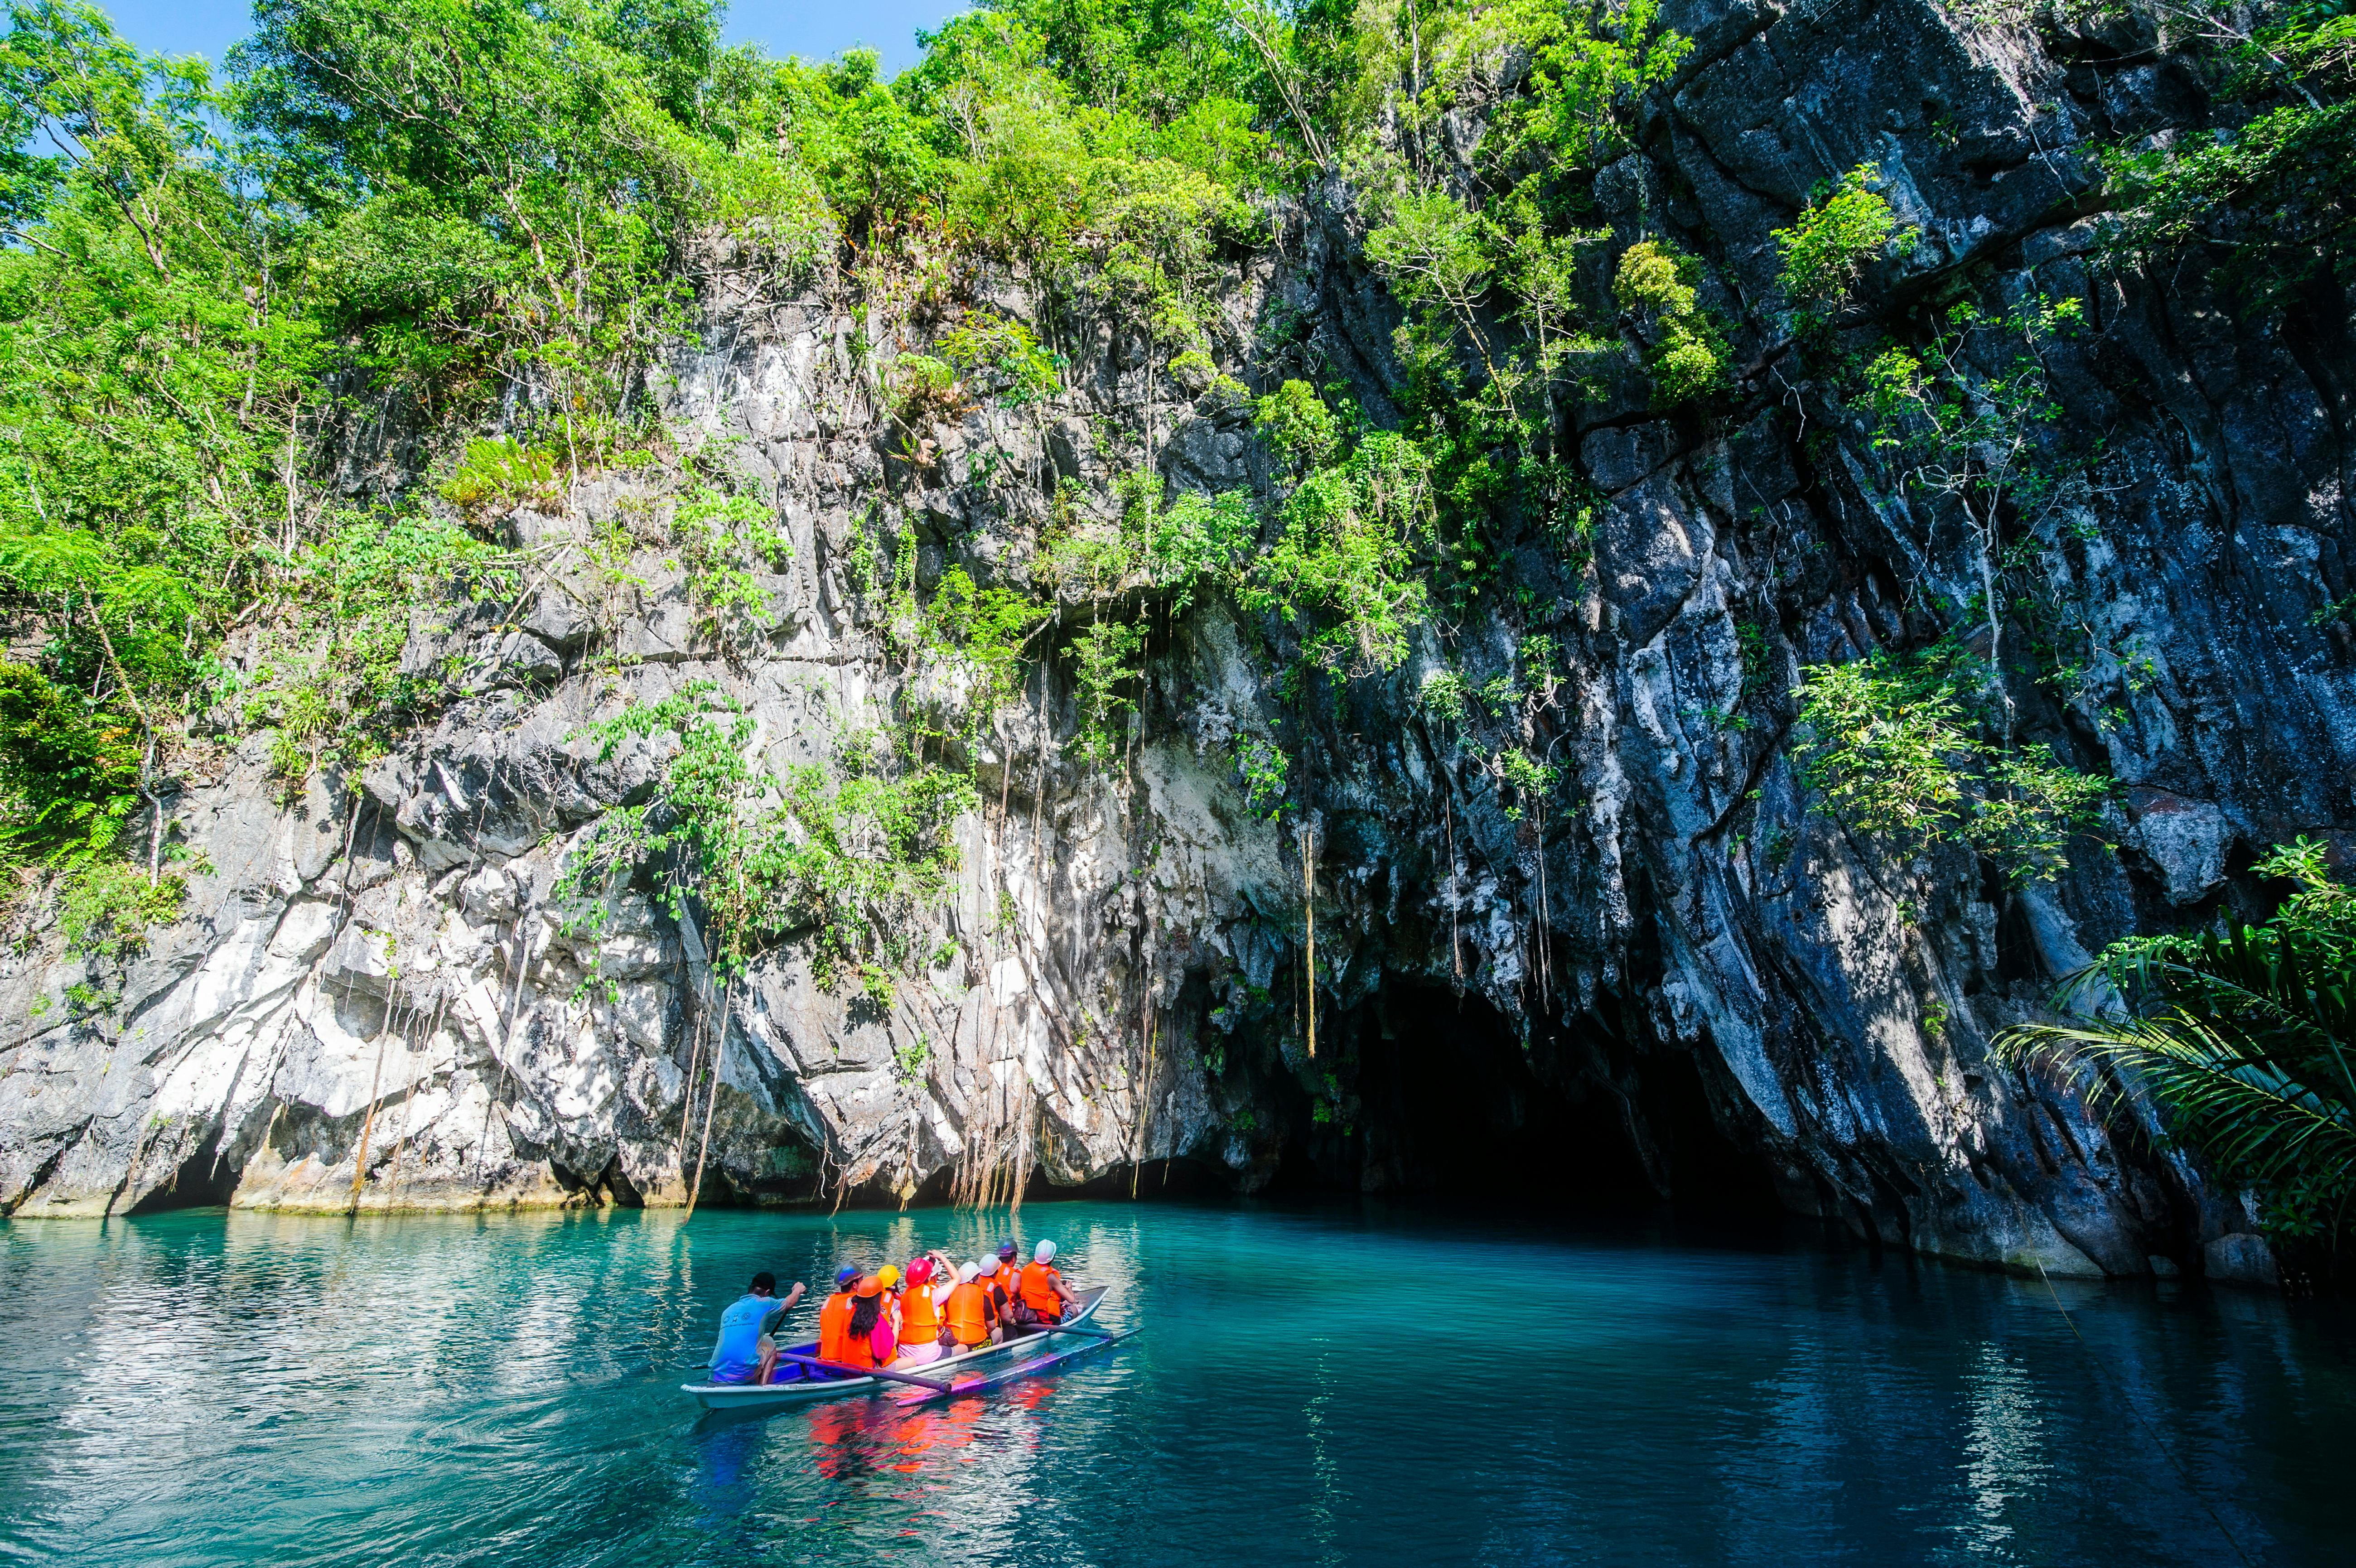 Entrance to the Underground River in Puerto Princesa Palawan